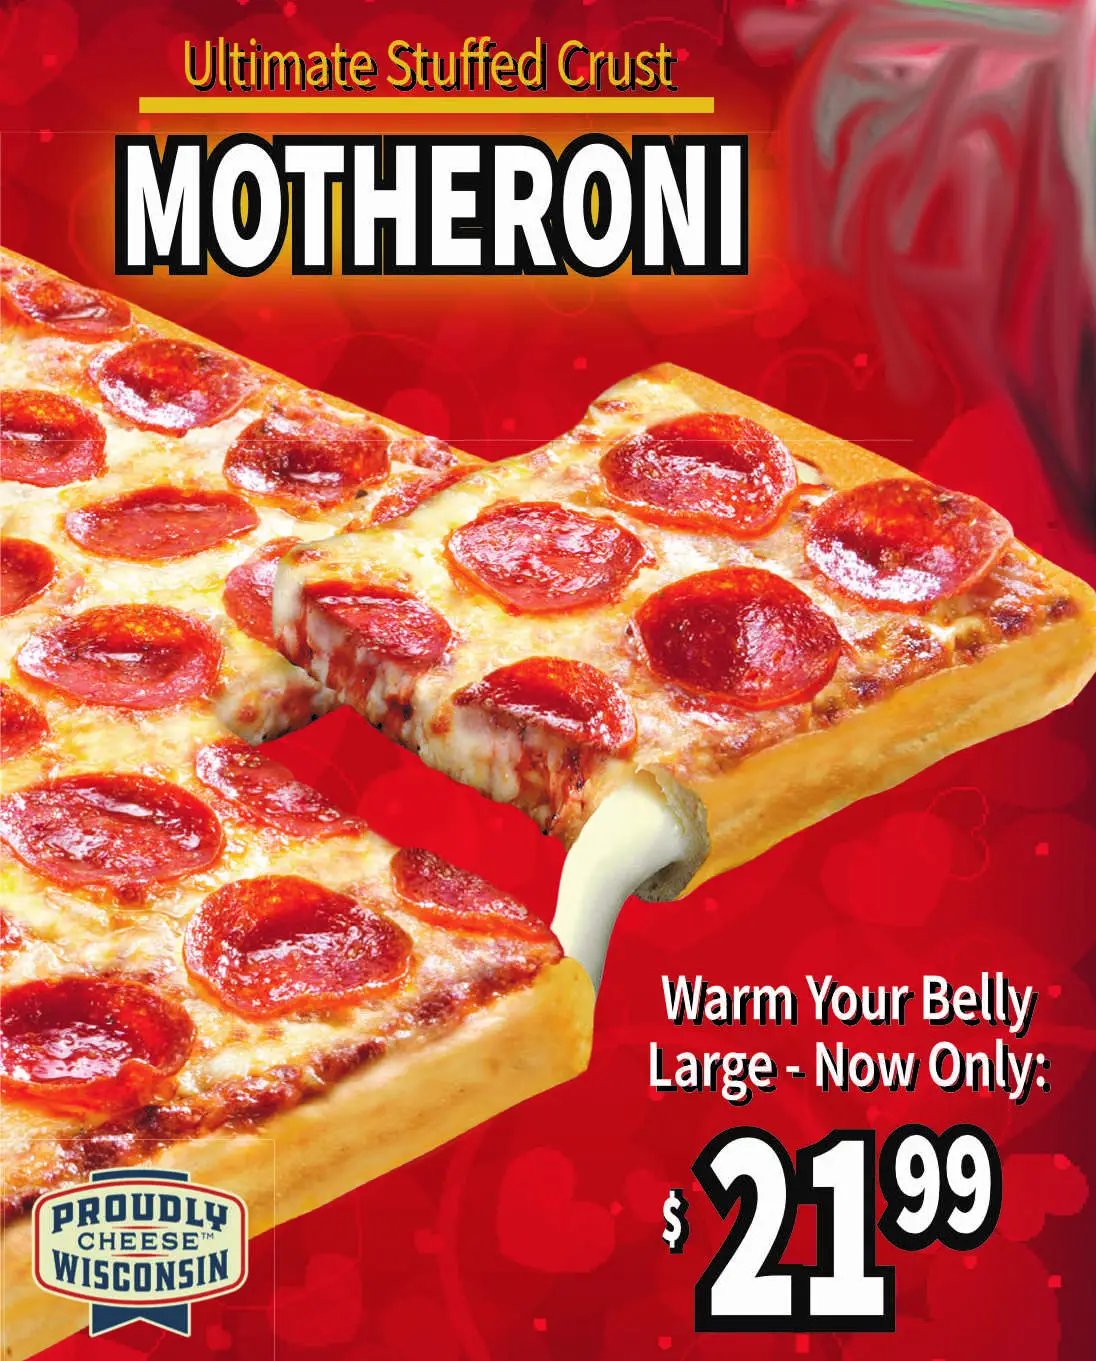 Rocky Rococo Pizza and Pasta Presidents Day [President's Day] Get Motheroni Pizza for $21.99